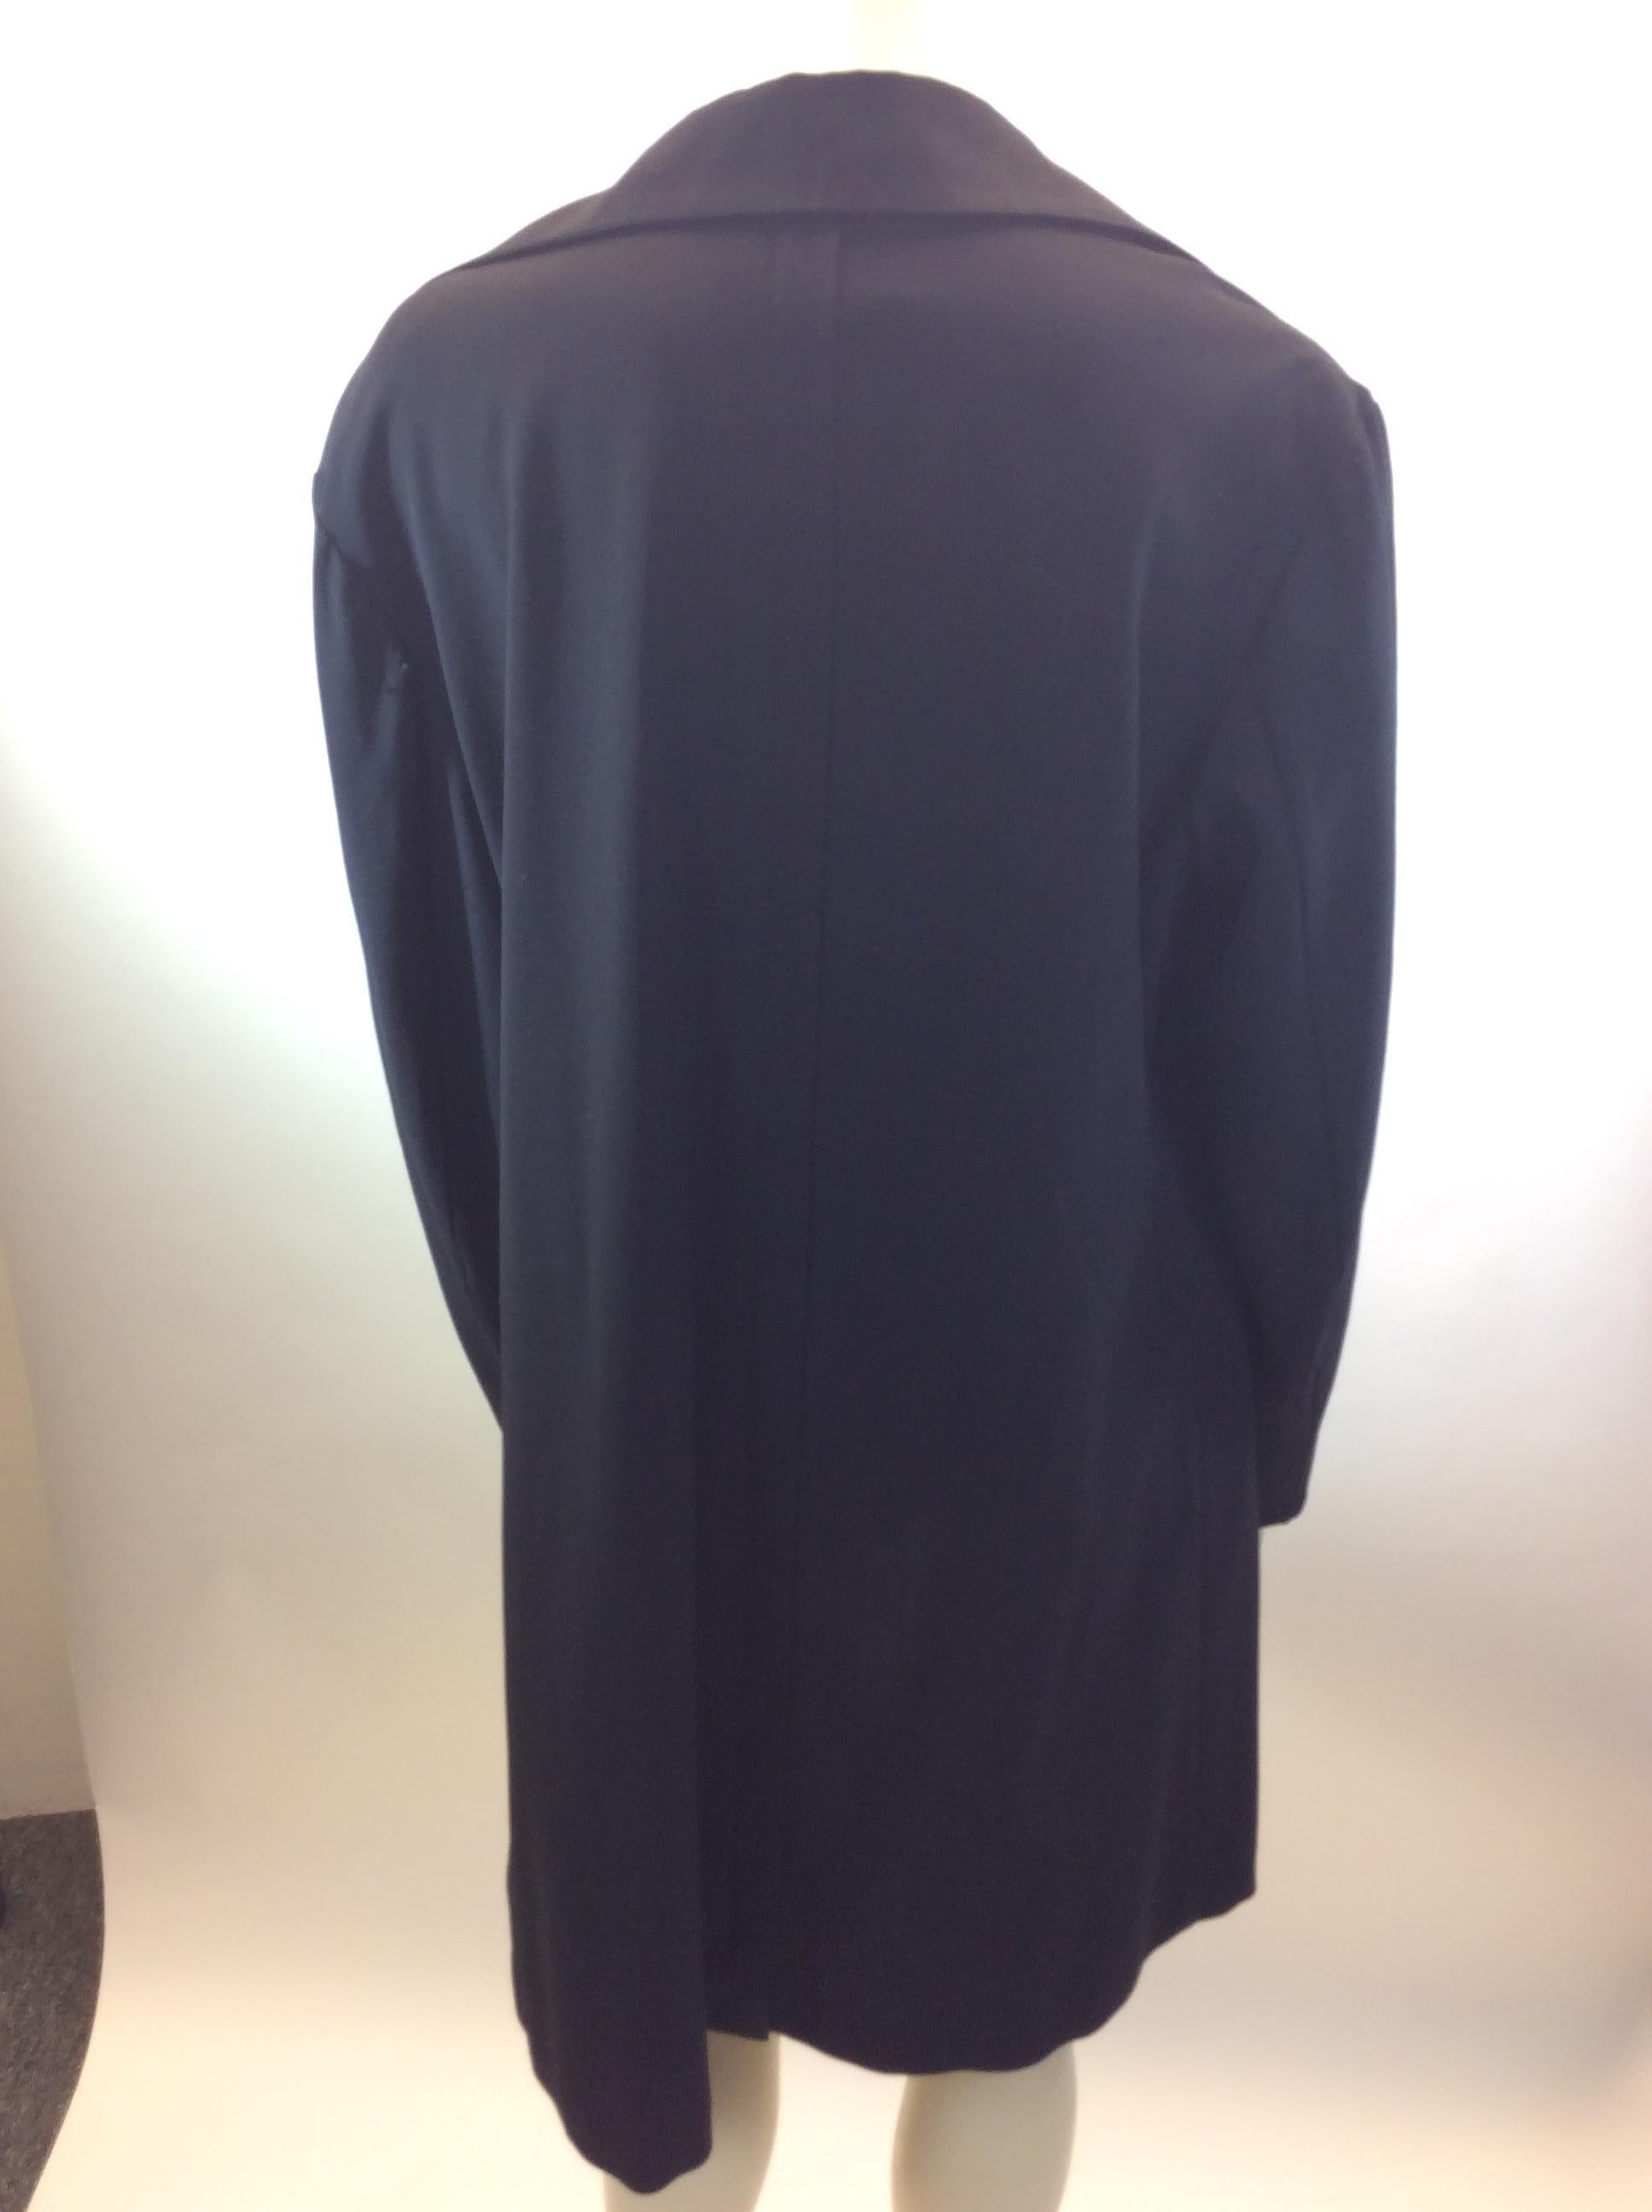 Yohji Yamamoto Black Jacket with Zipper Detail In Good Condition For Sale In Narberth, PA